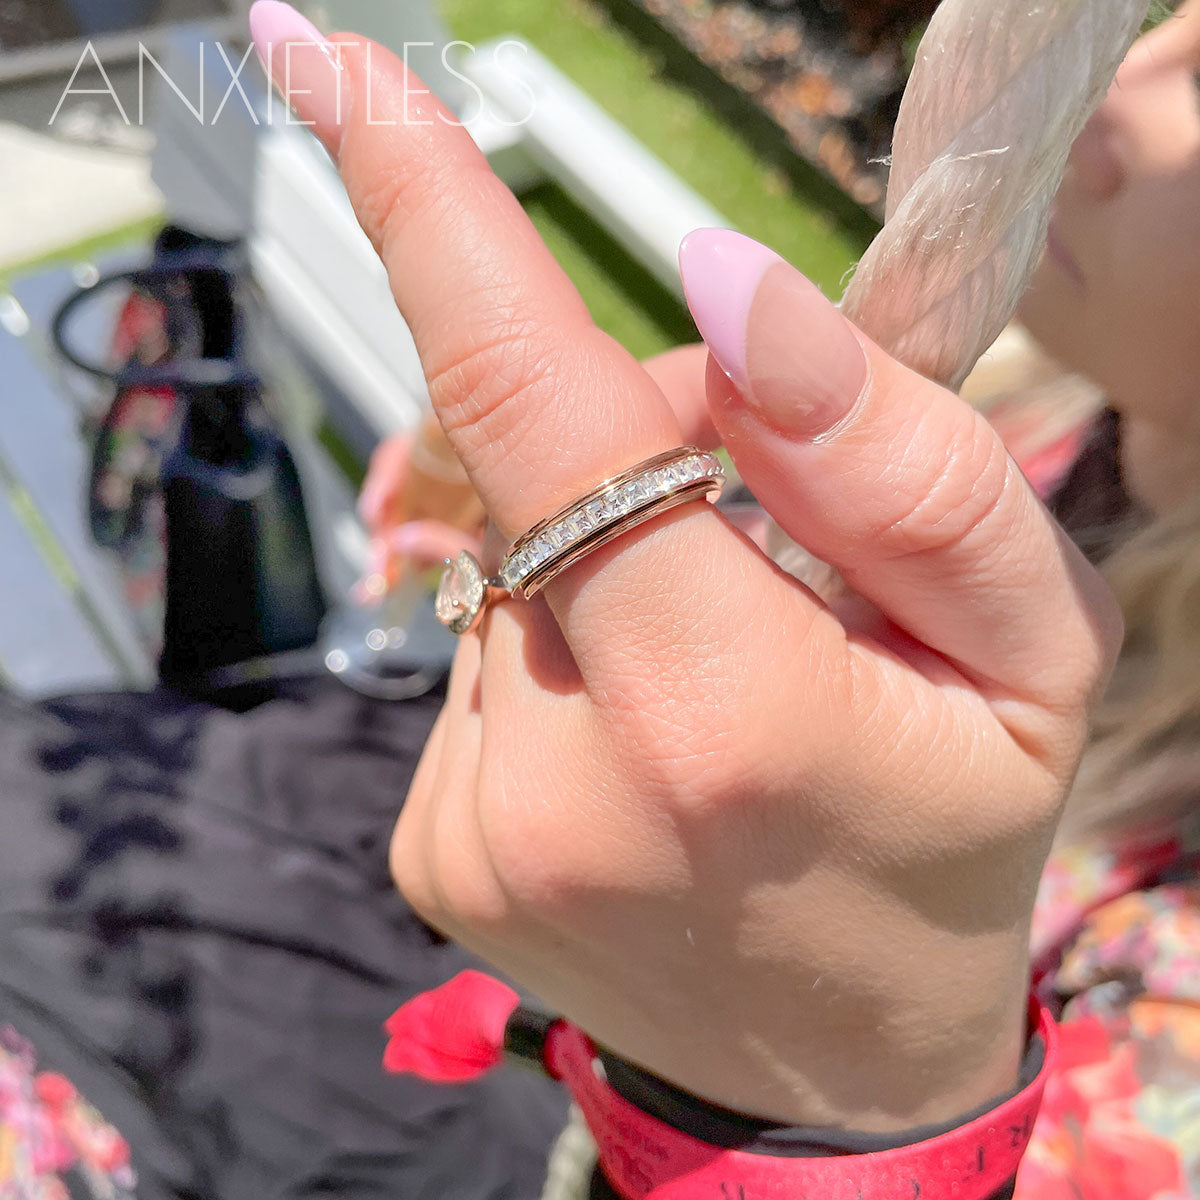 Anxiety Ring Australia Rose Gold